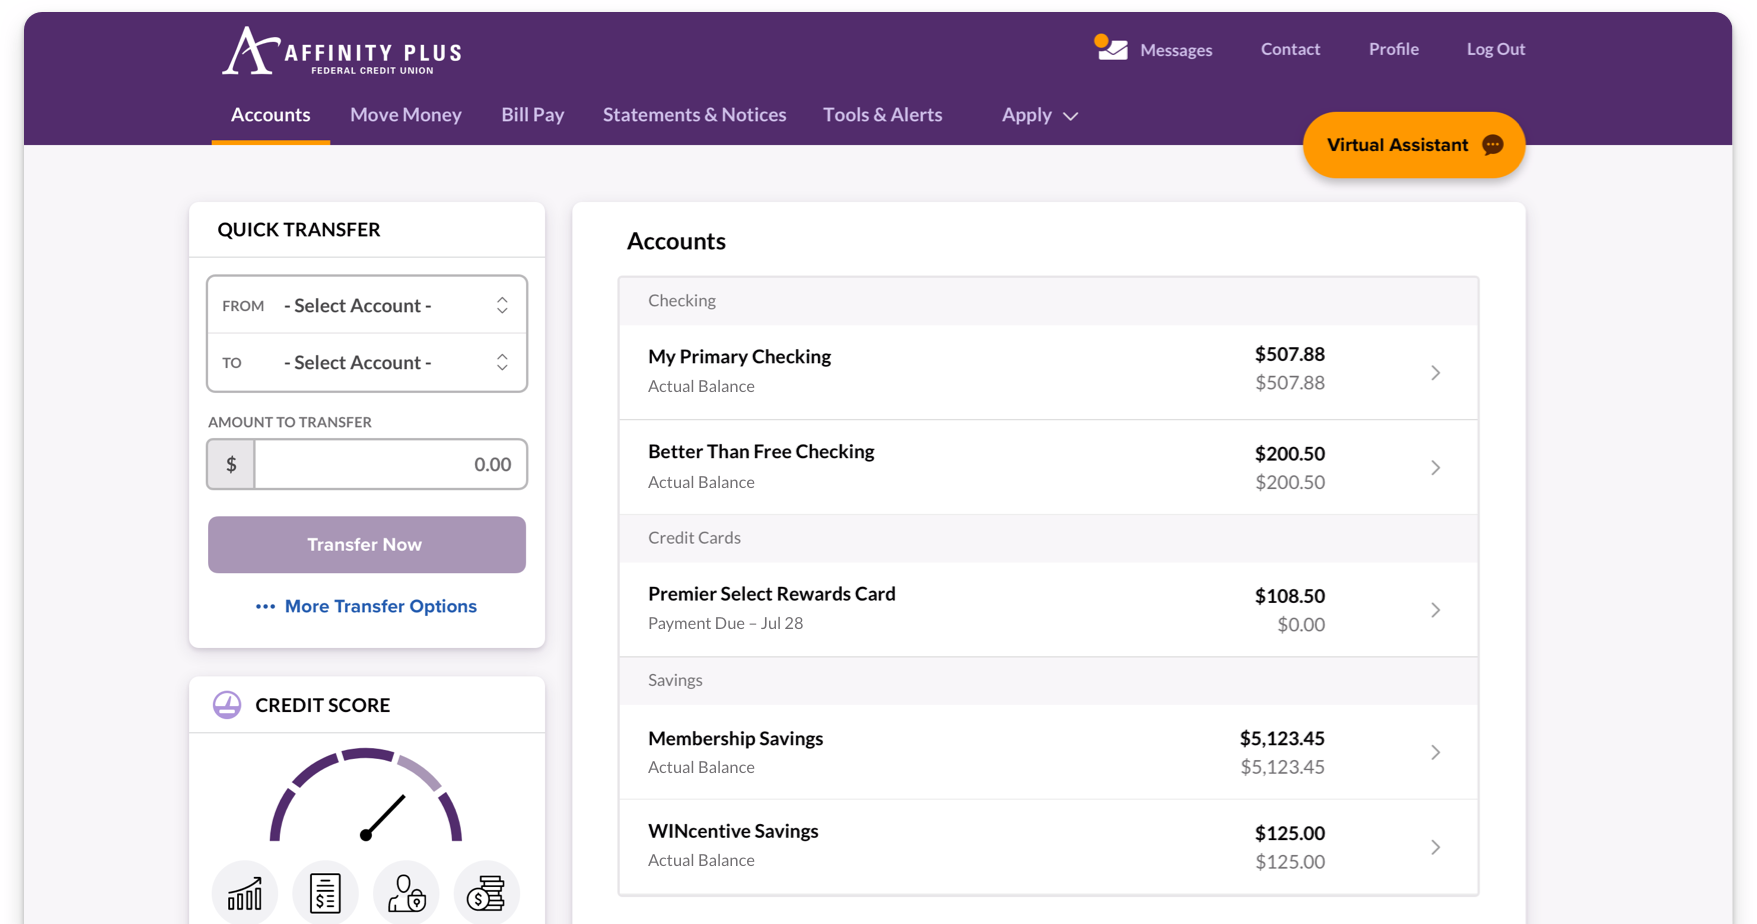 Affinity Plus Online Banking Accounts screen